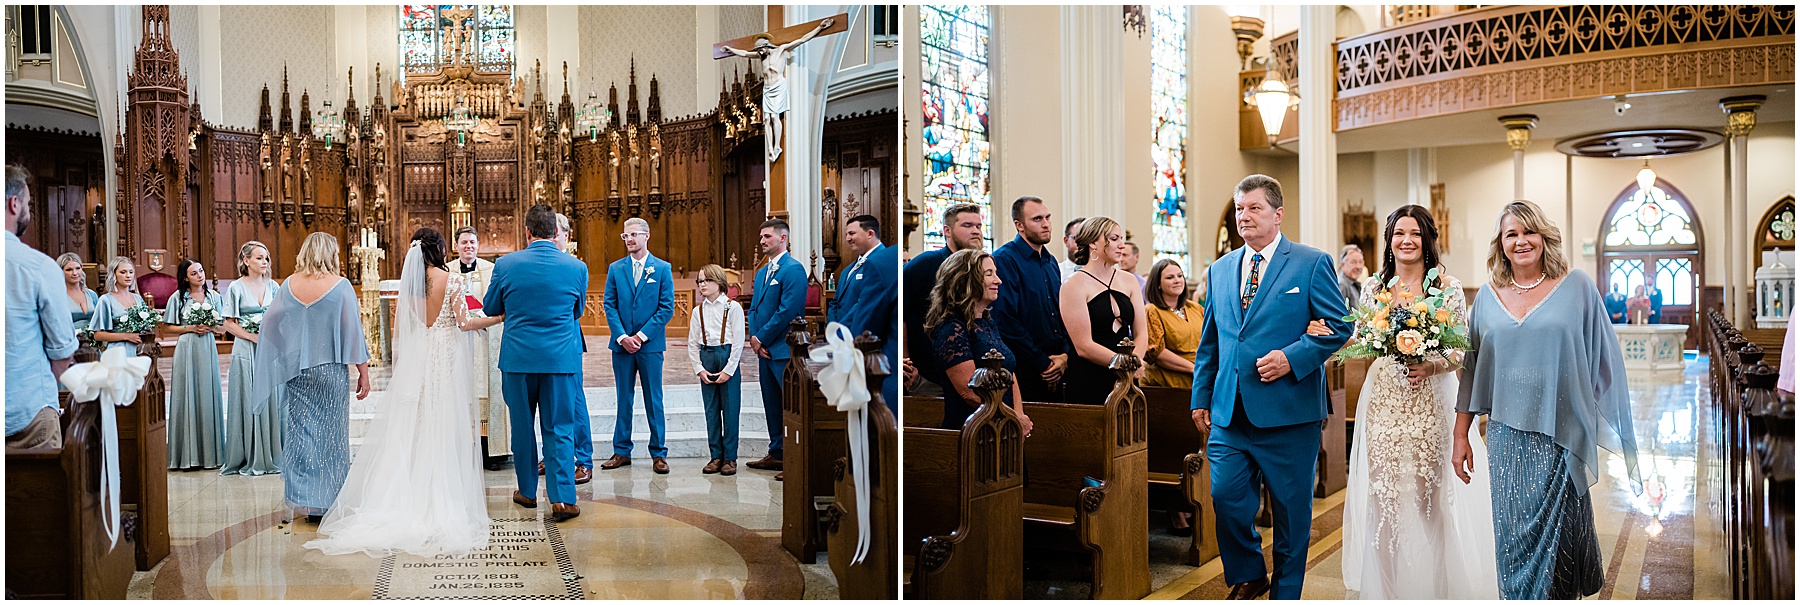 Fort Wayne wedding photographers capture bride and groom during ceremony before getting married